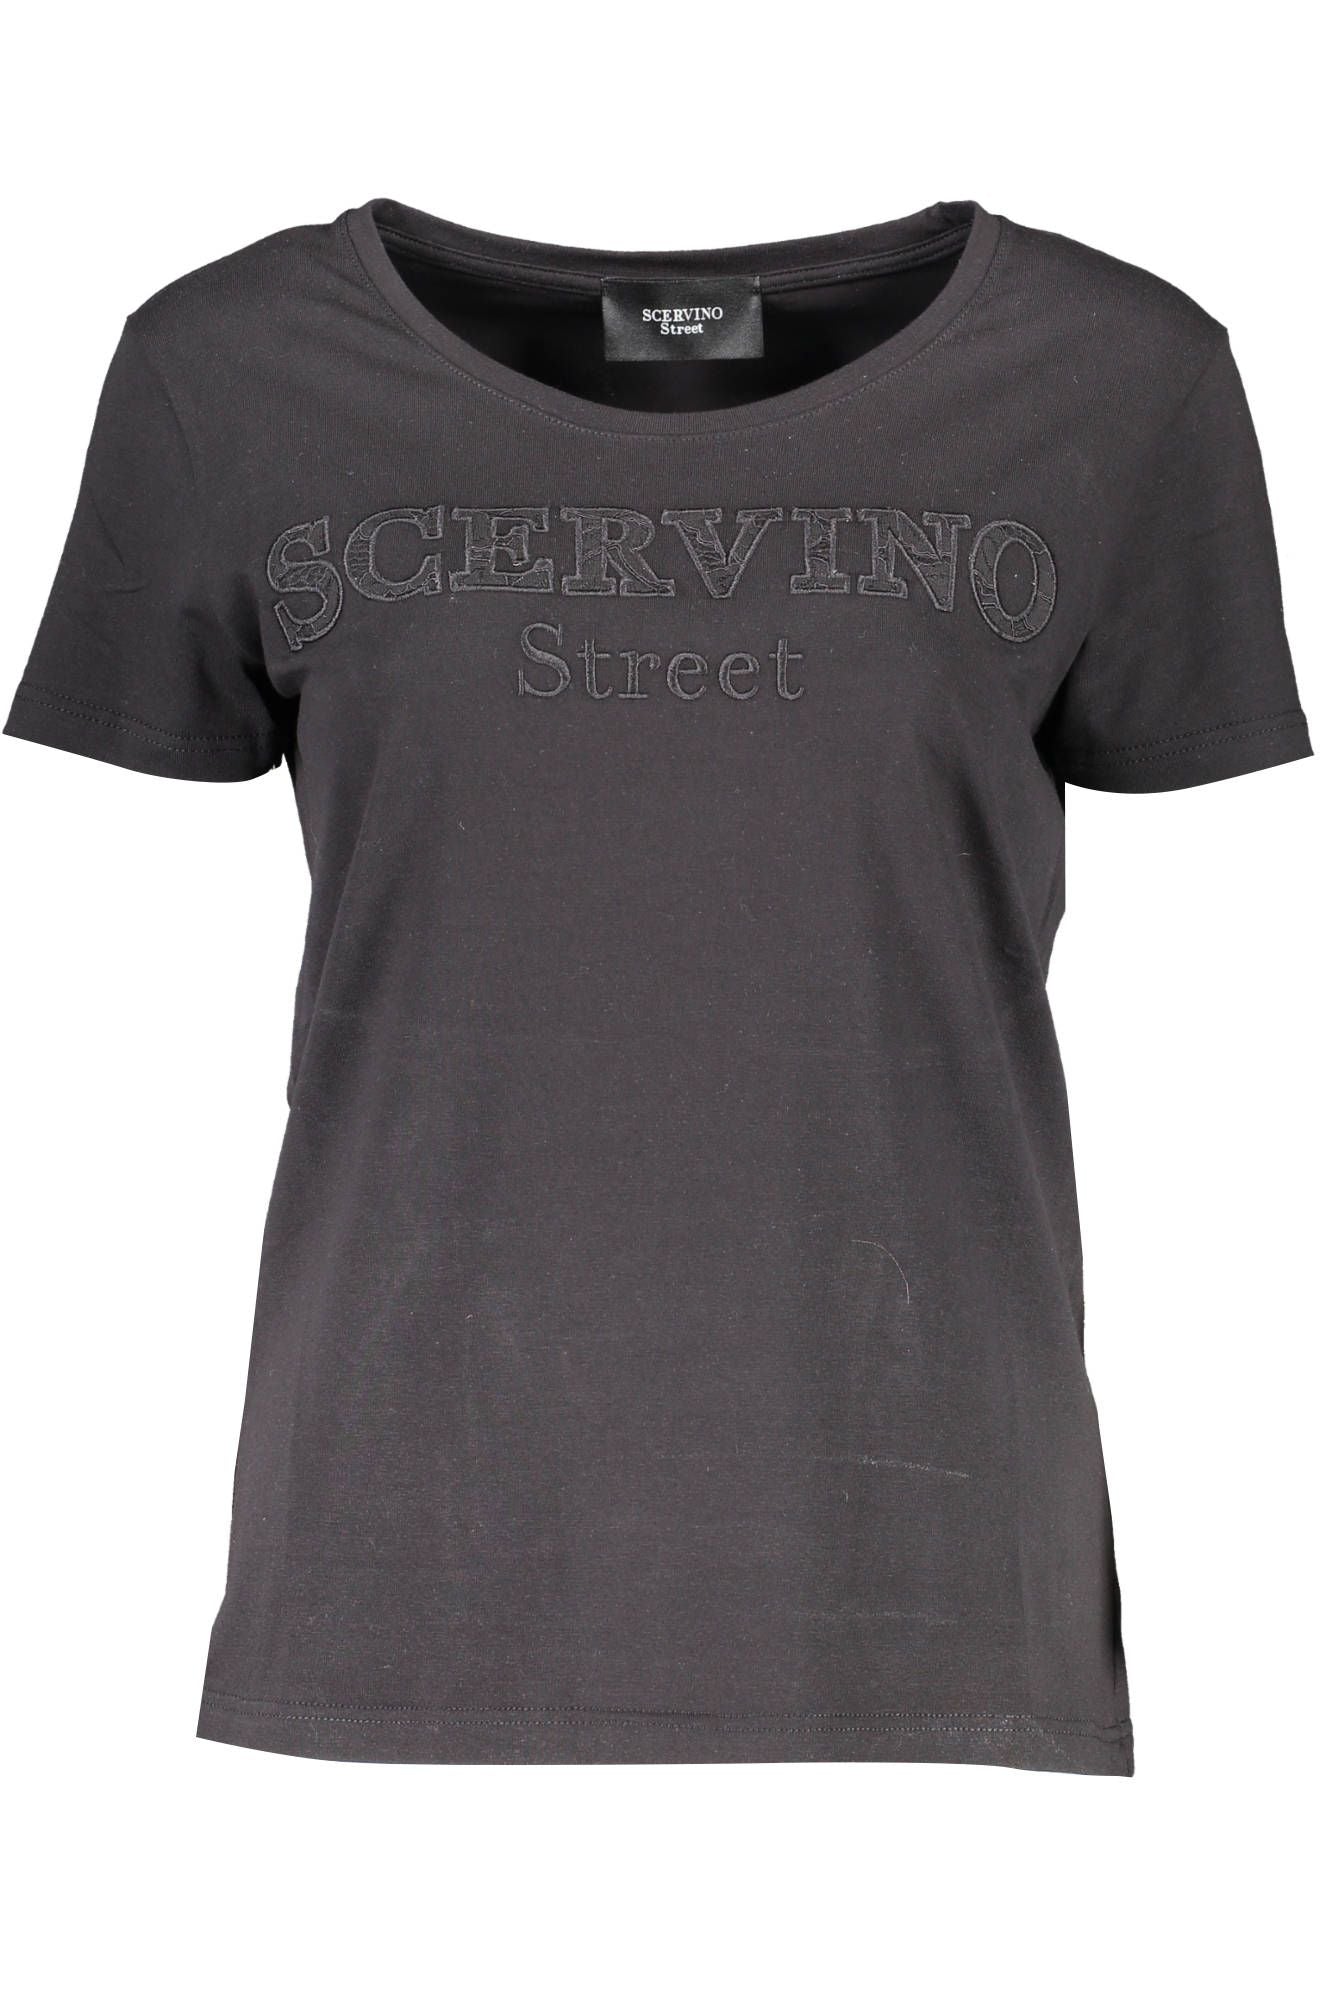 Chic Contrasting Embroidered Tee